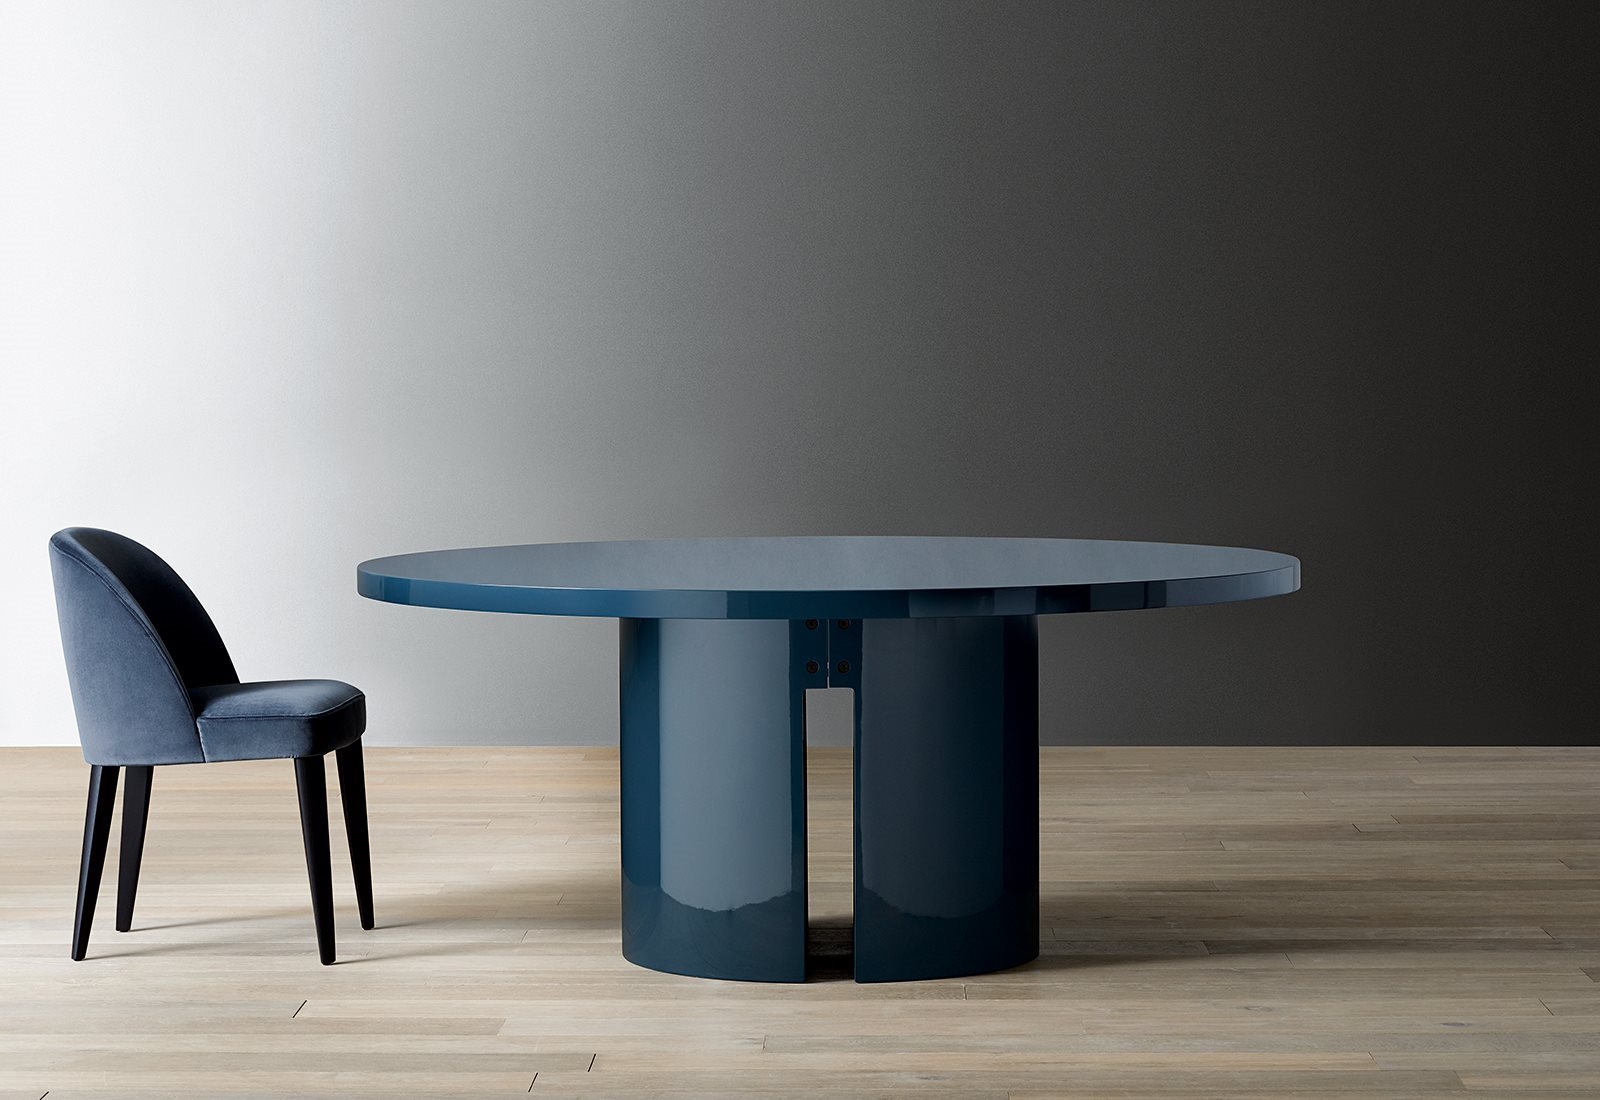 gong-dining-table-02-1600x1100